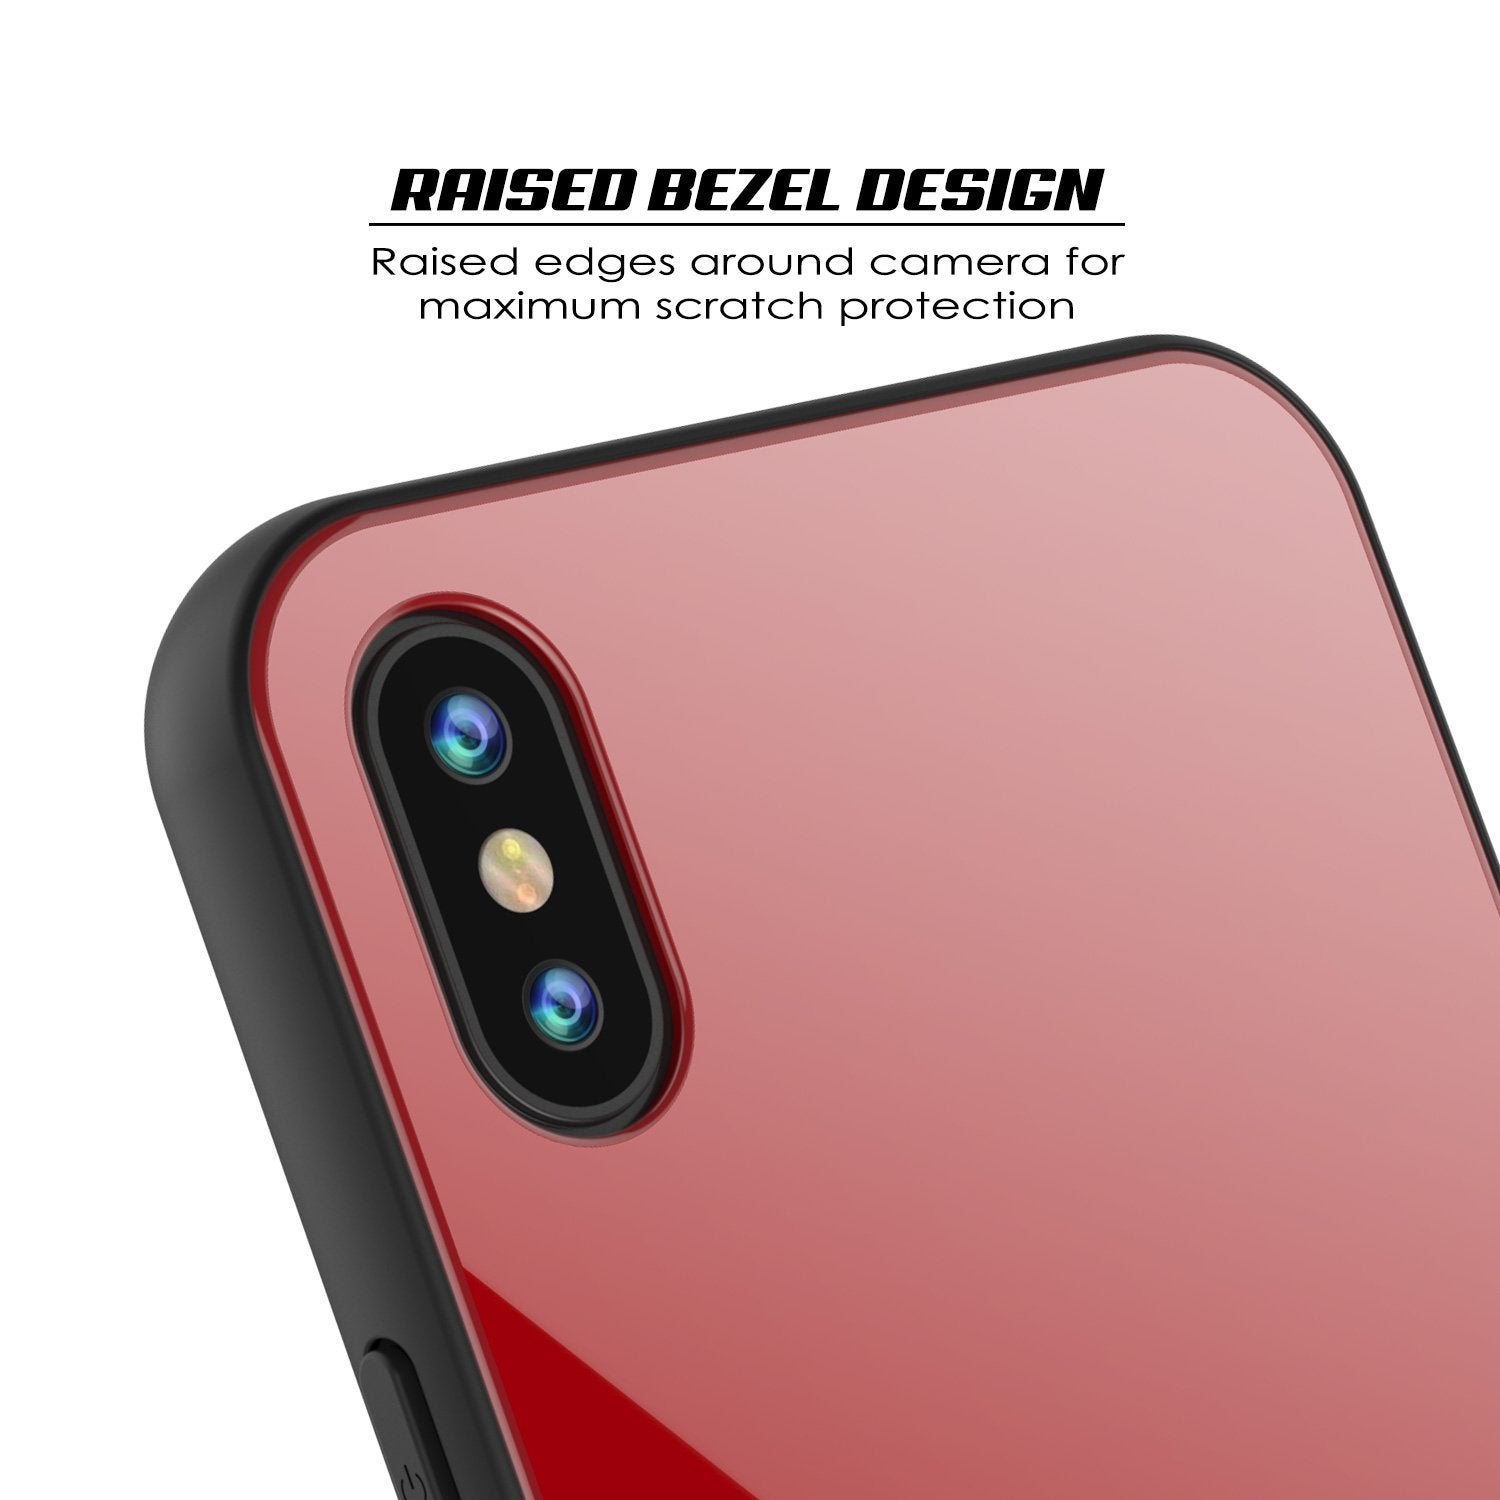 iPhone X Case, Punkcase GlassShield Ultra Thin Protective 9H Full Body Tempered Glass Cover W/ Drop Protection & Non Slip Grip for Apple iPhone 10 [Red]